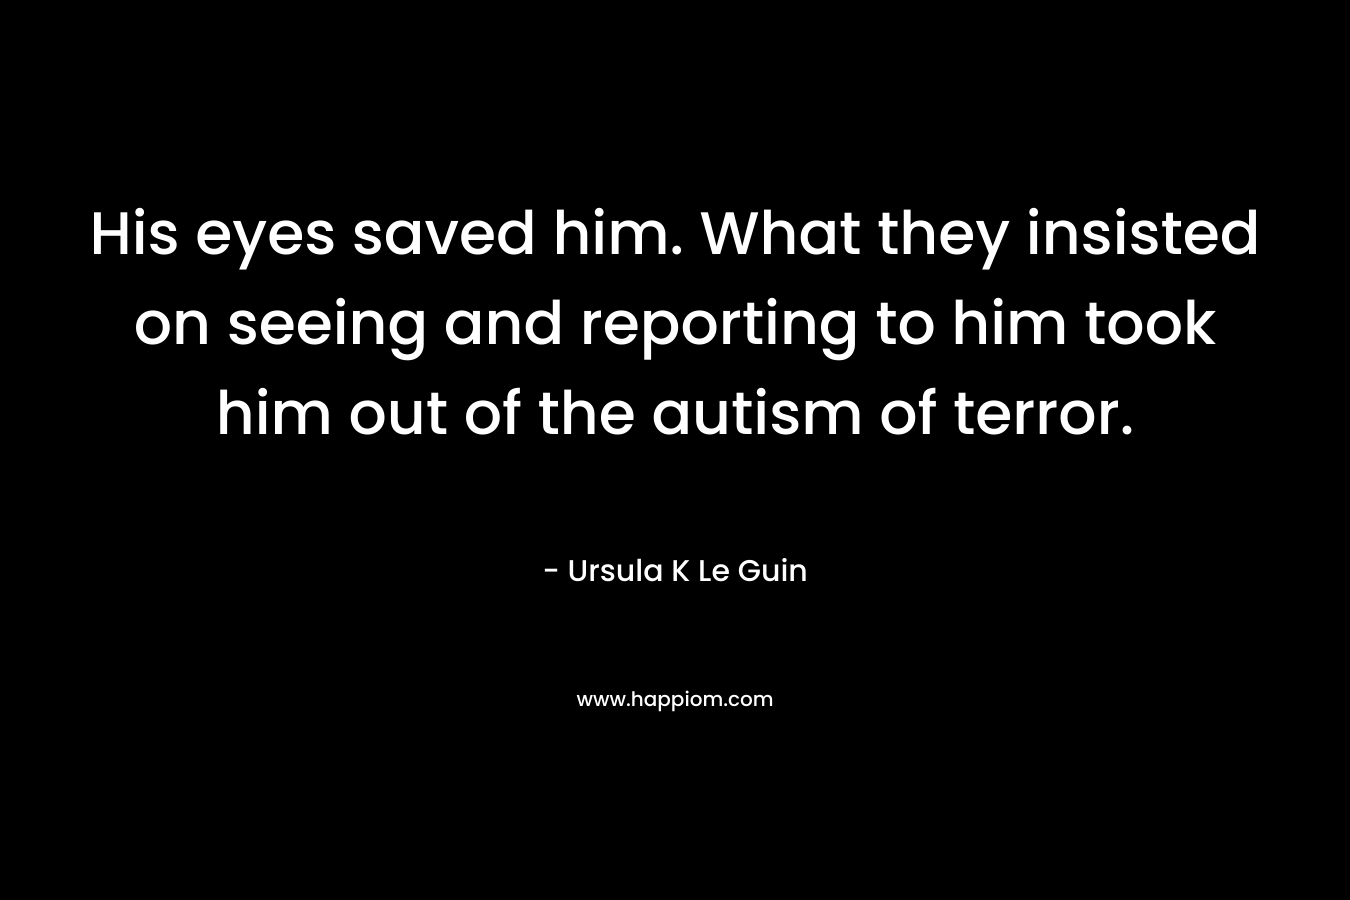 His eyes saved him. What they insisted on seeing and reporting to him took him out of the autism of terror.